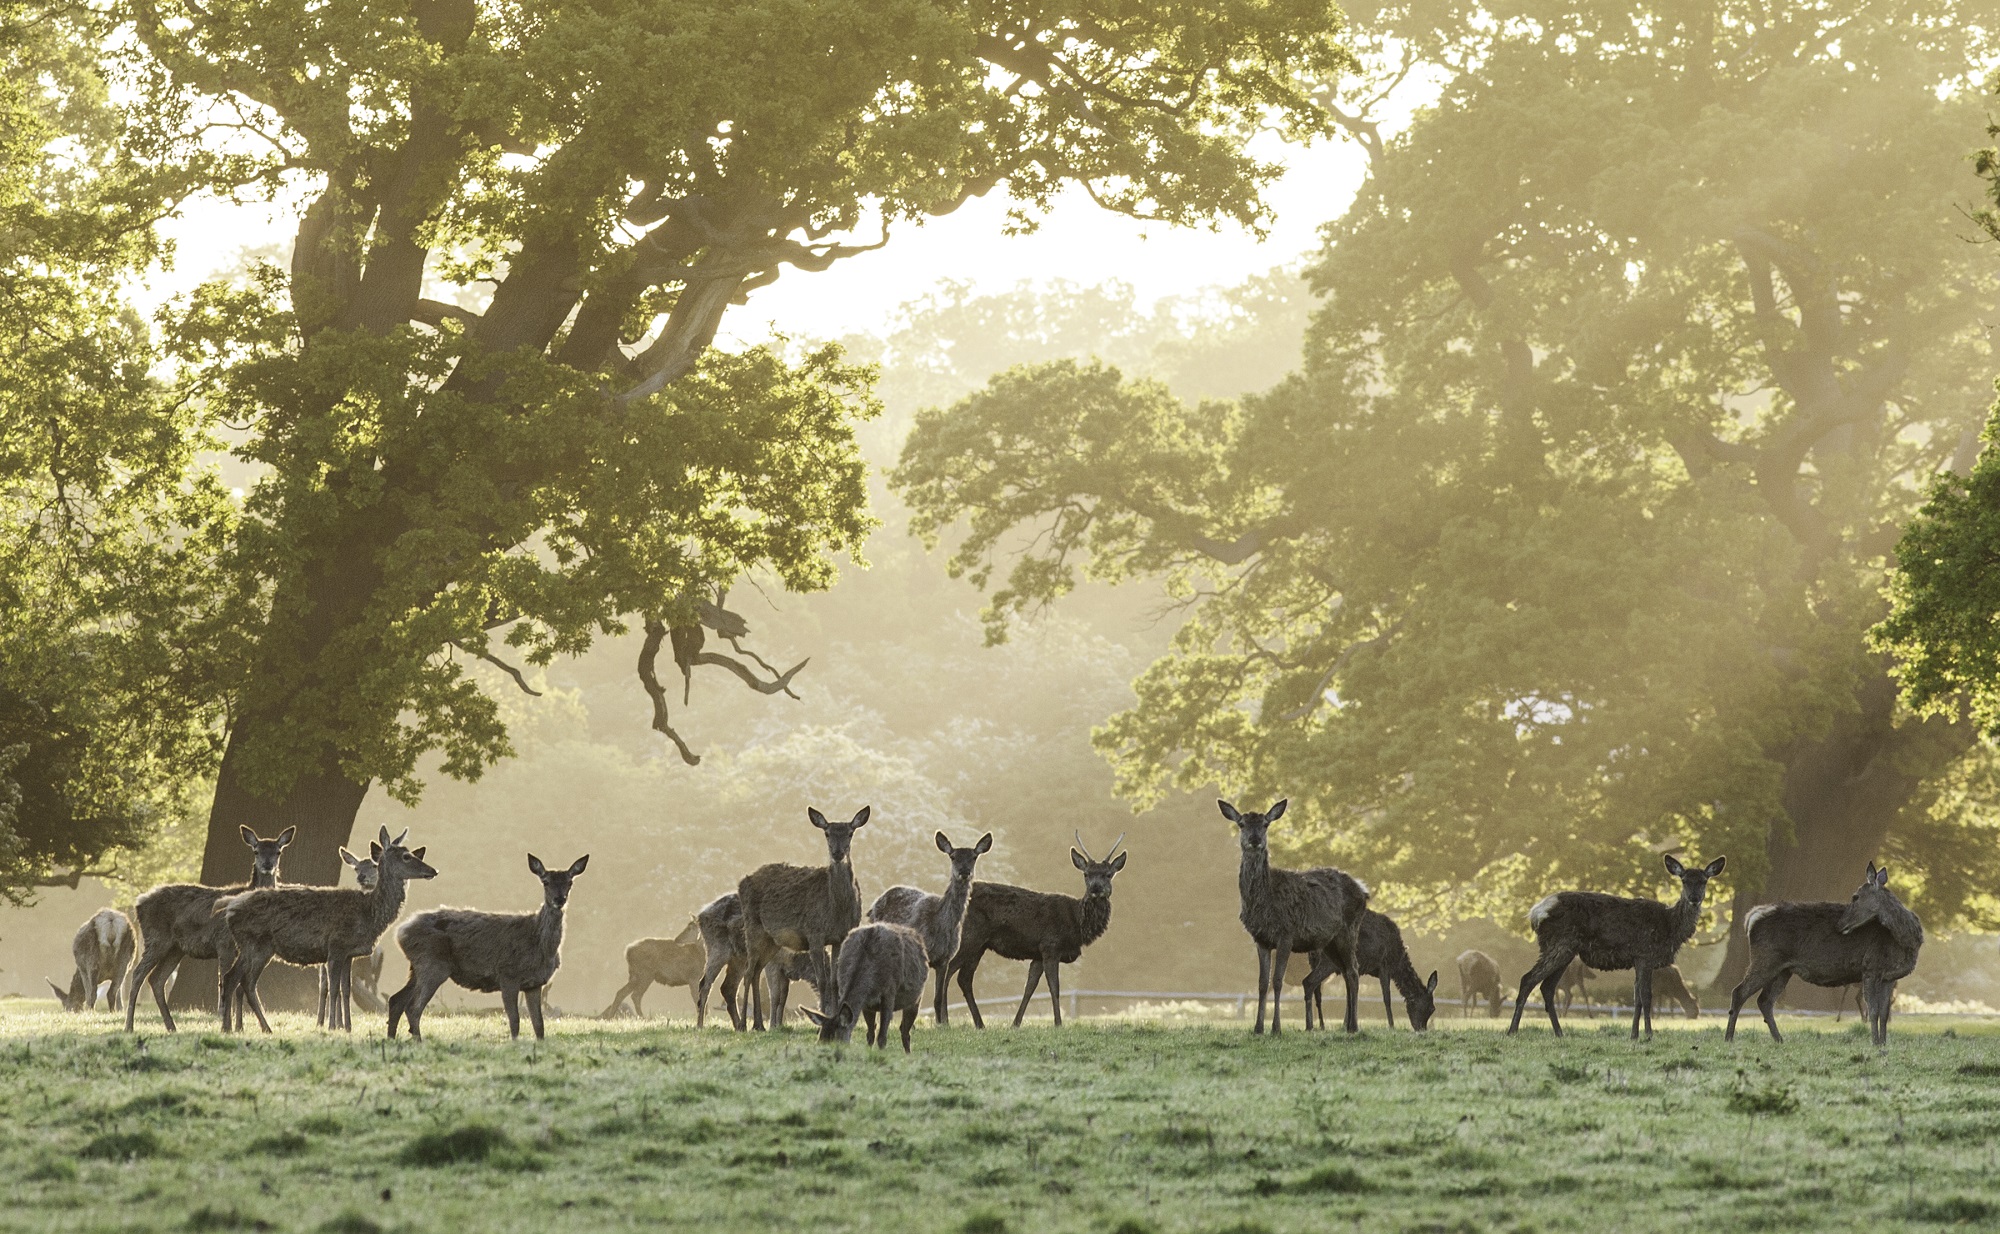 Deer grazing in the Deer Park, with large autumnal trees in the background.